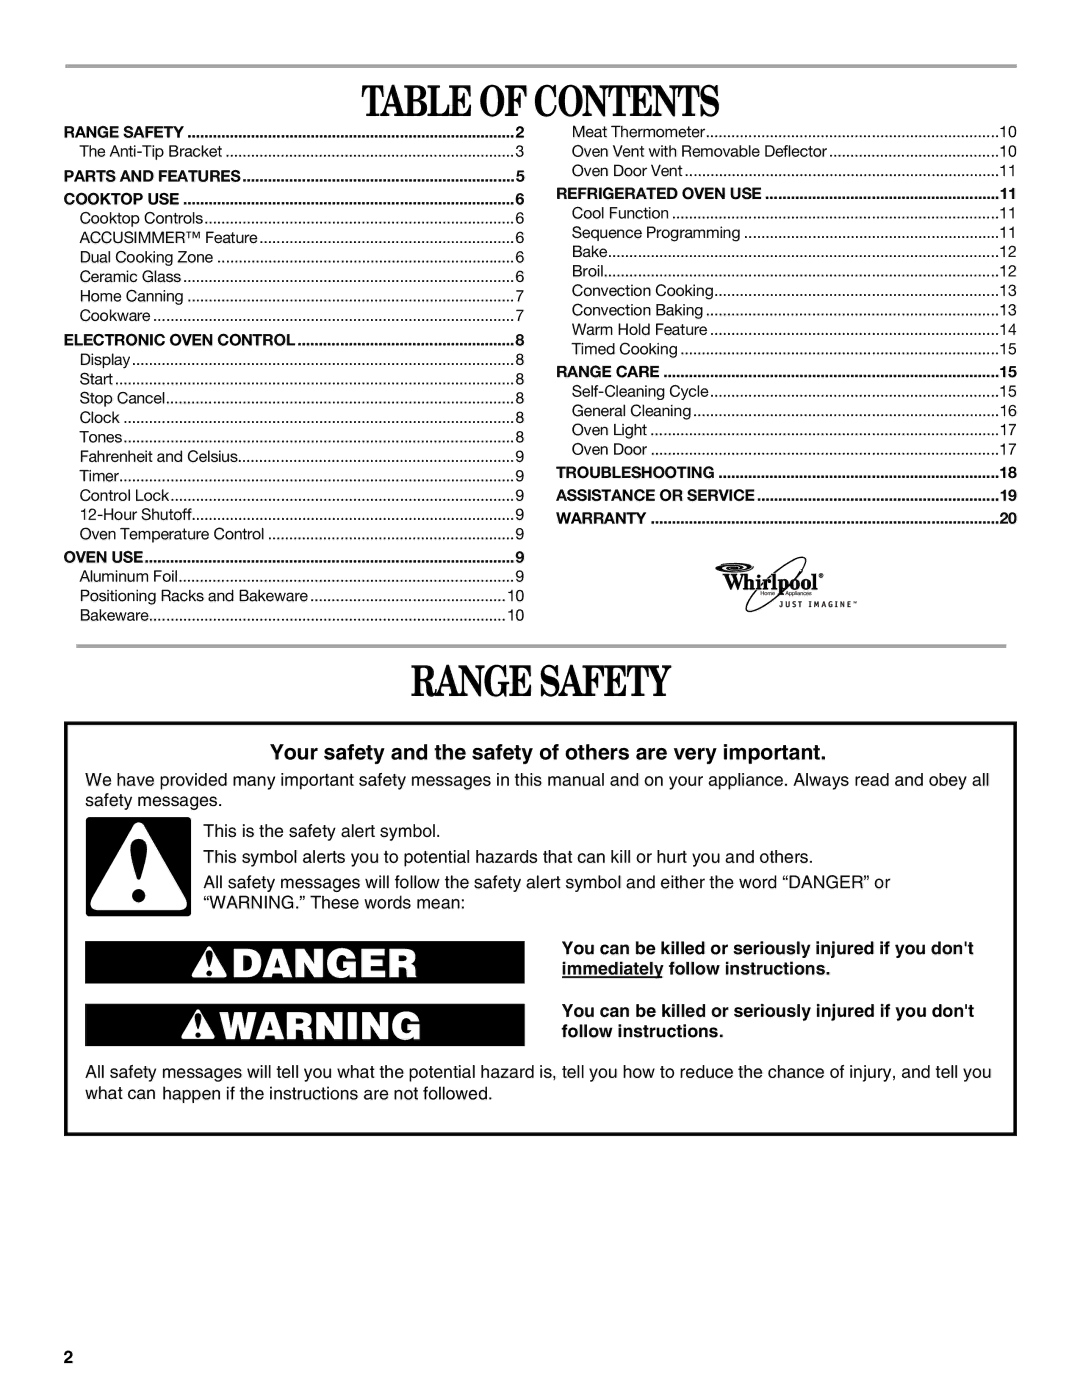 Whirlpool YGR556 manual Table of Contents, Range Safety 